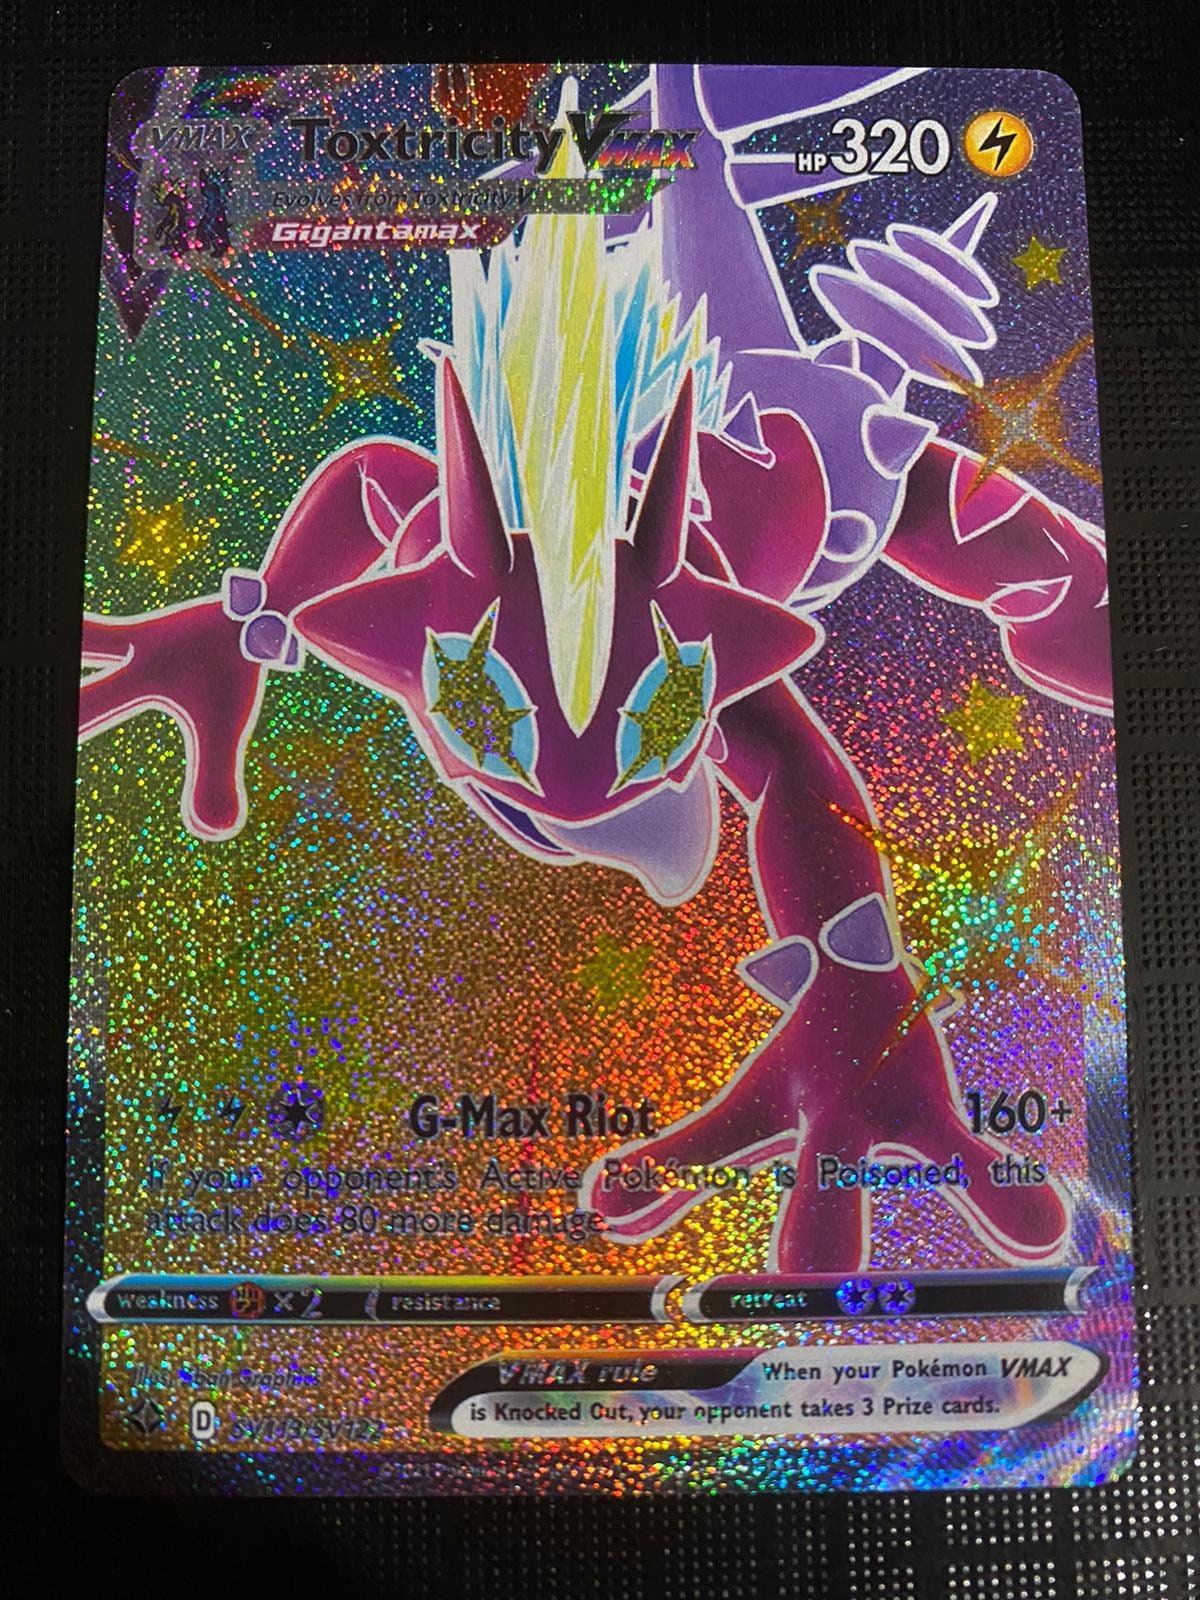 Pokémon TCG: Ditto As D-Ring Binder - 1 In.